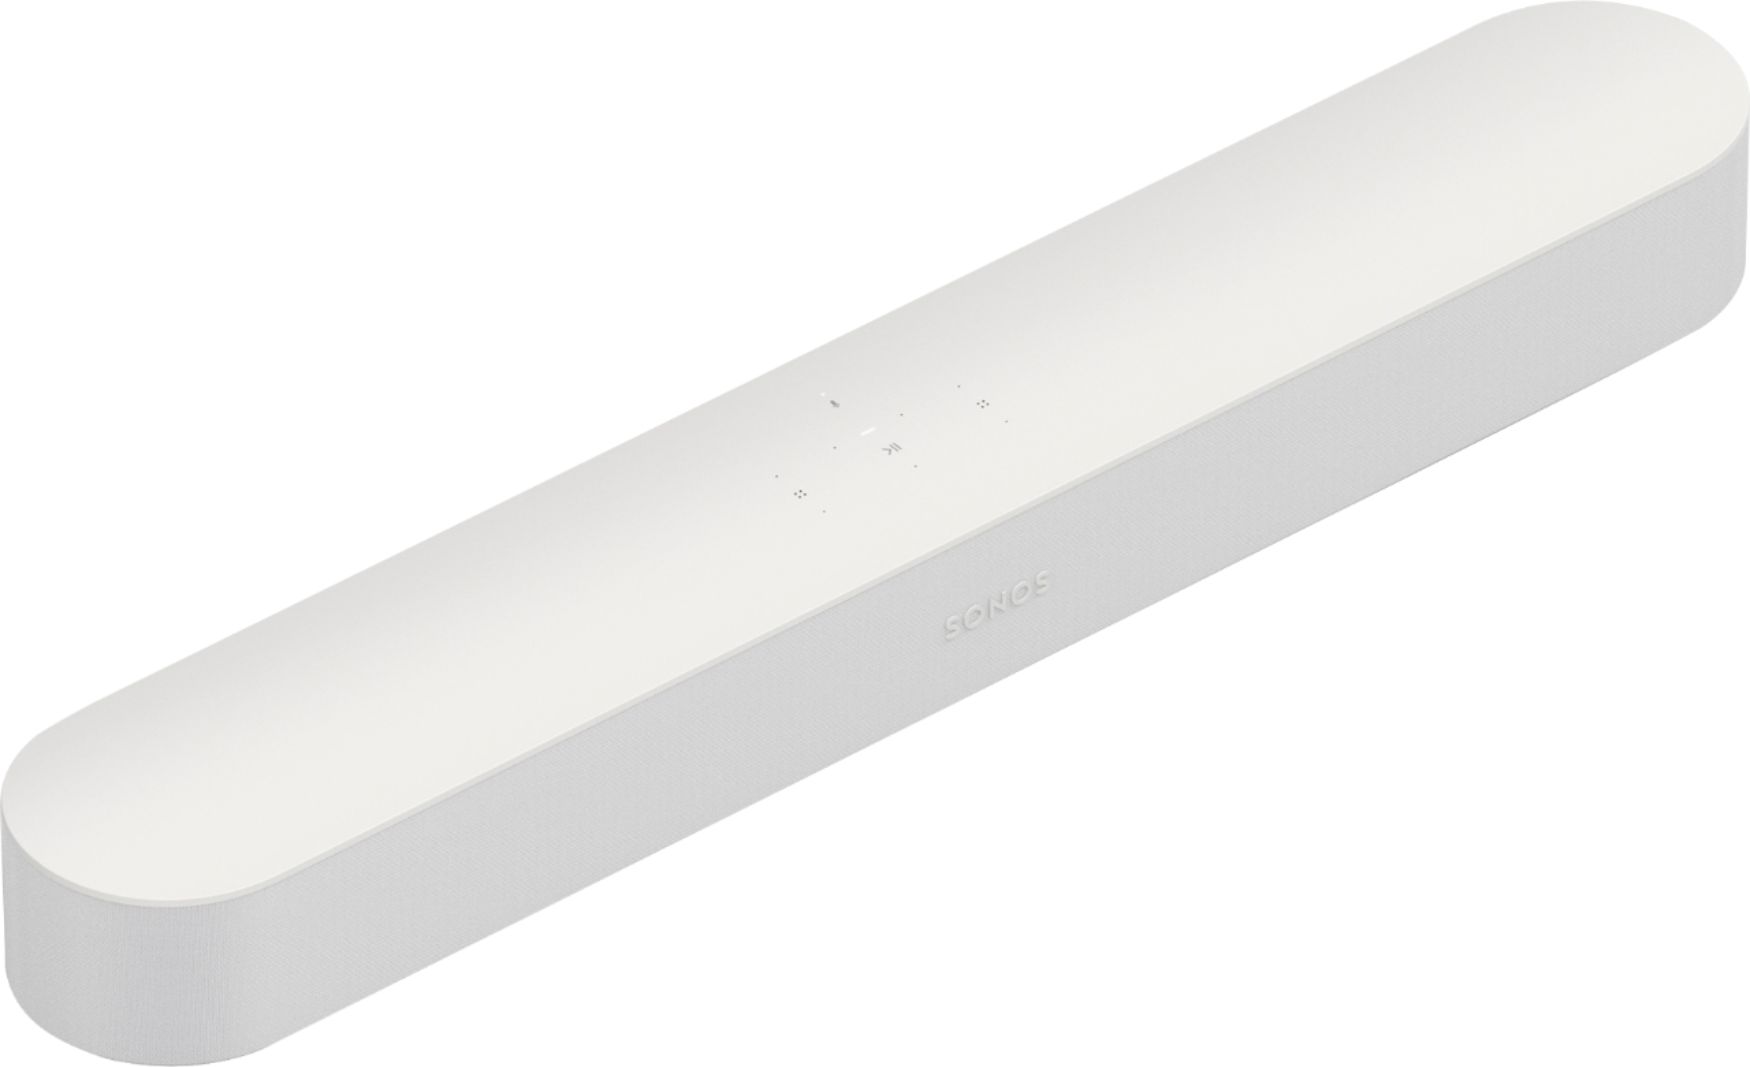 Angle View: Sonos - Long Straight Power Cable for Five, Beam, and Amp - White